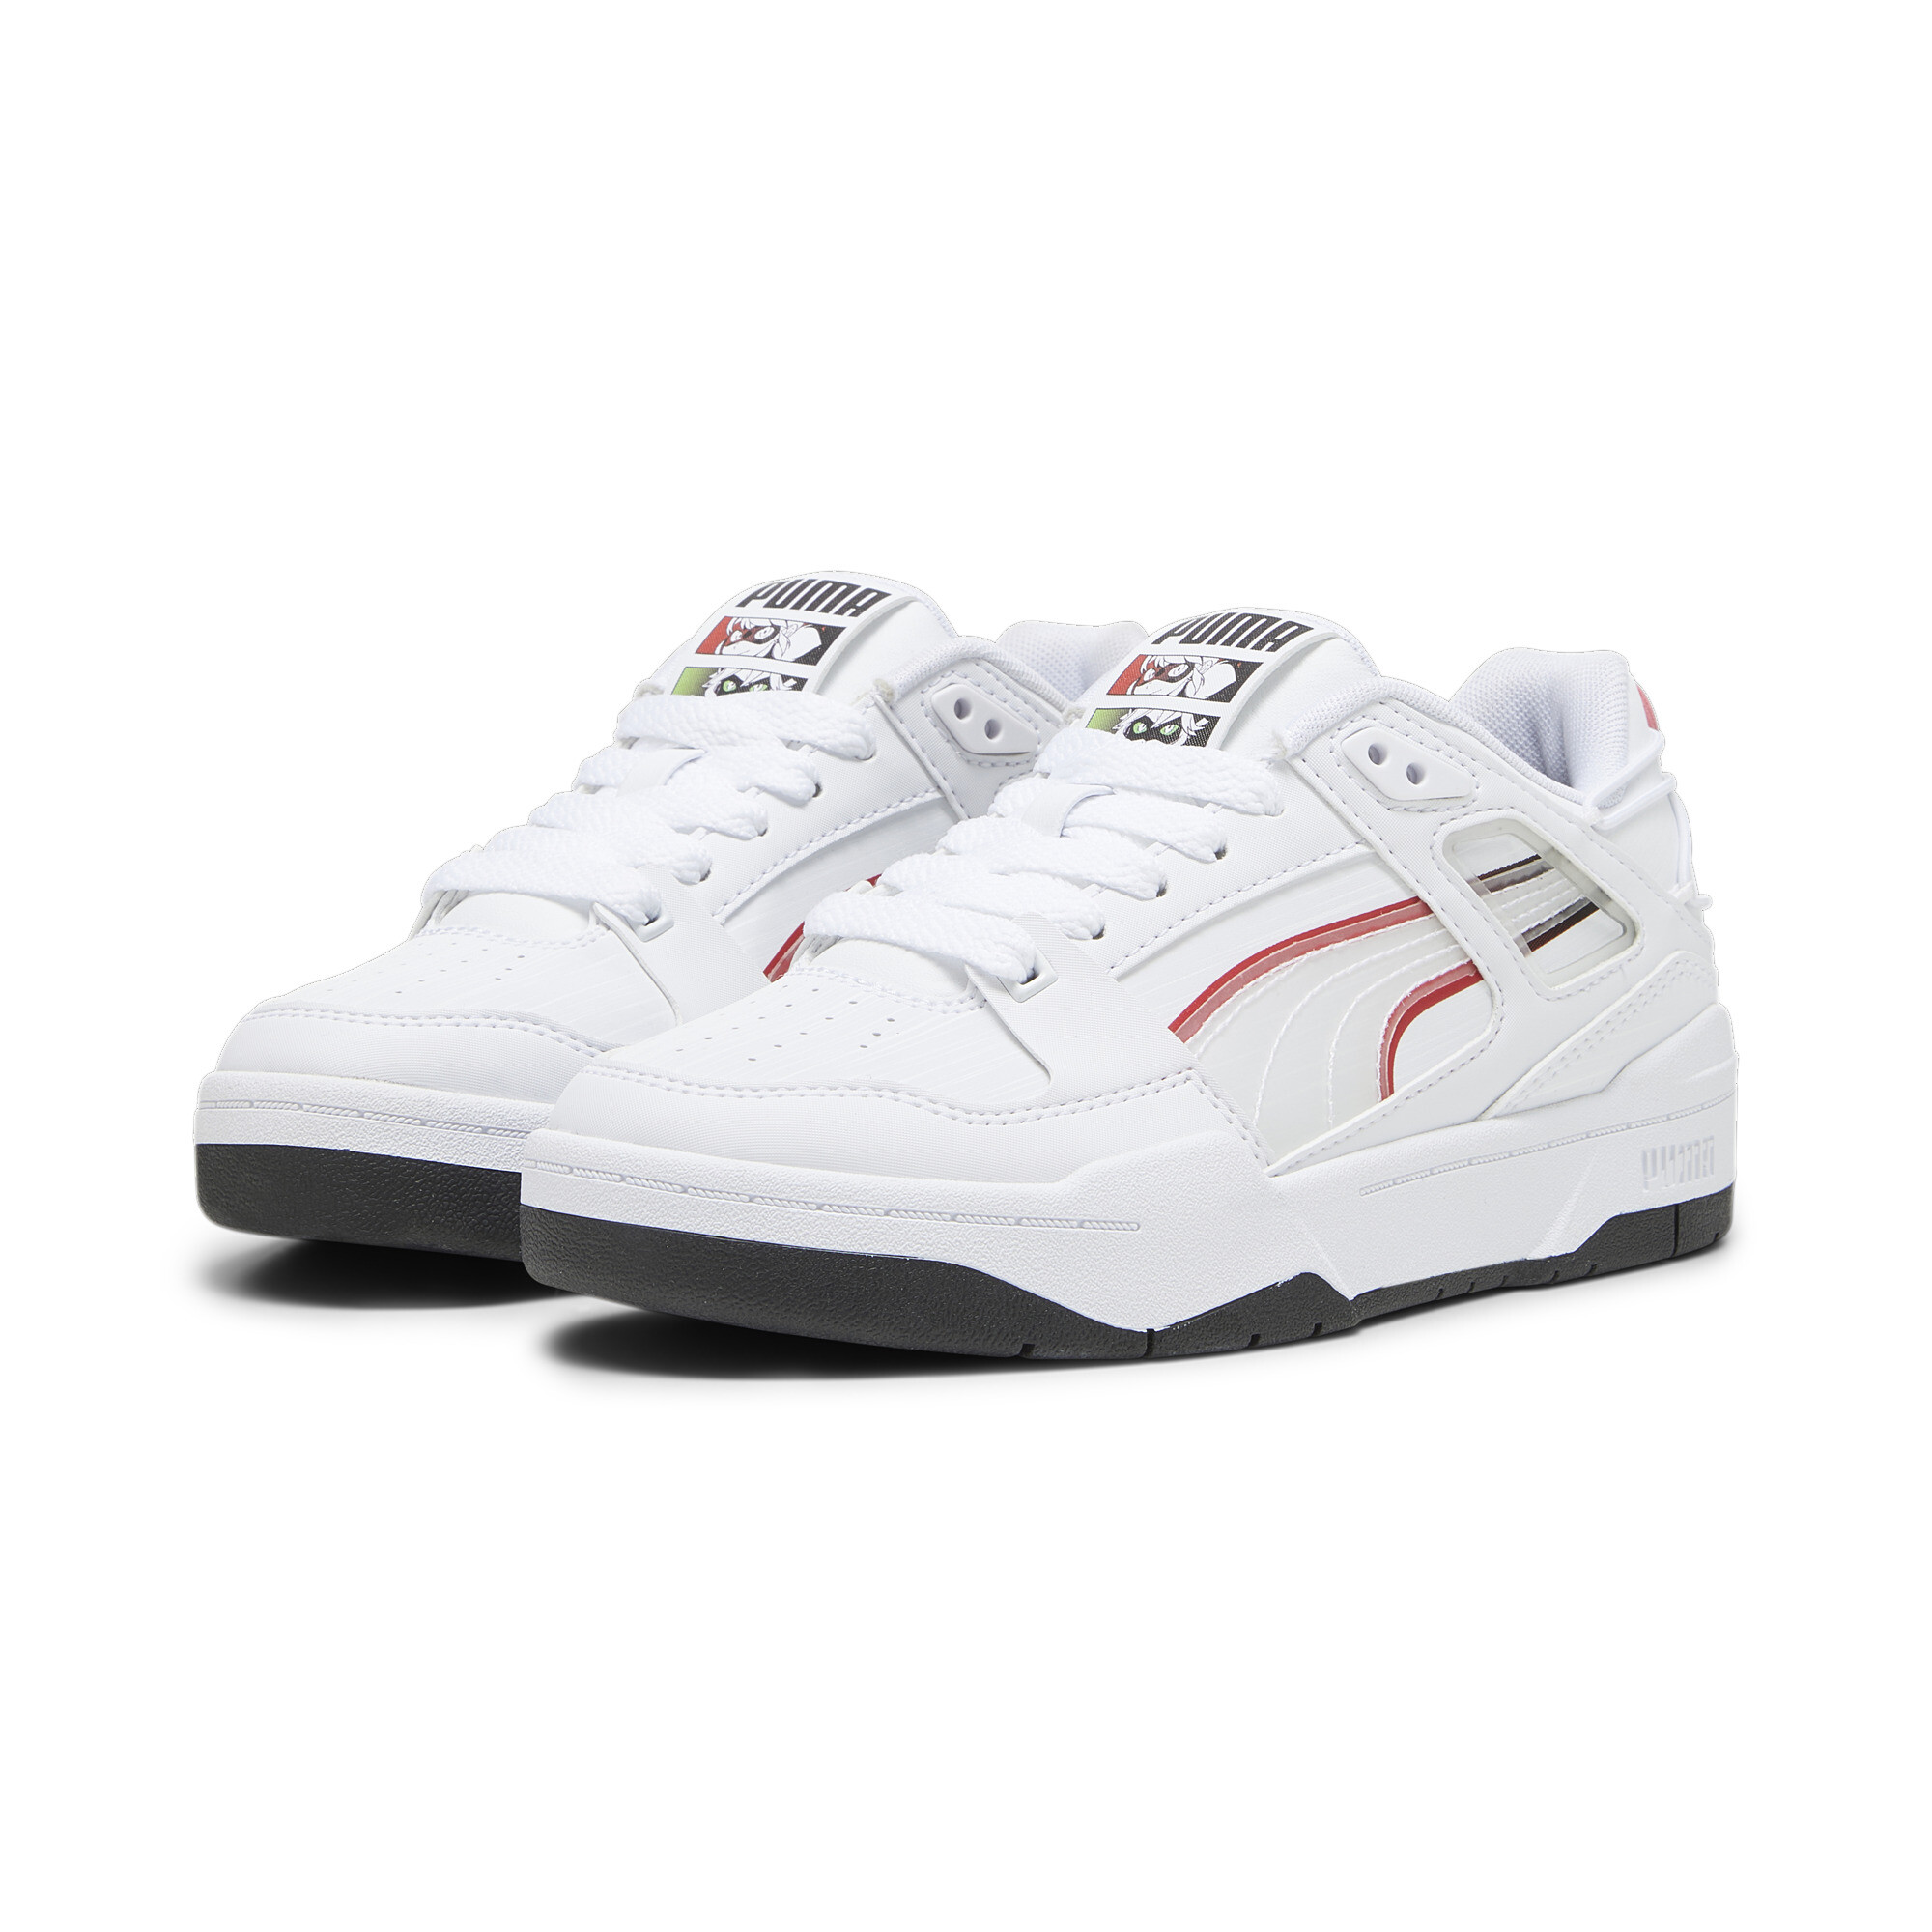 PUMA X MIRACULOUS Slipstream Youth Sneakers In White, Size EU 35.5